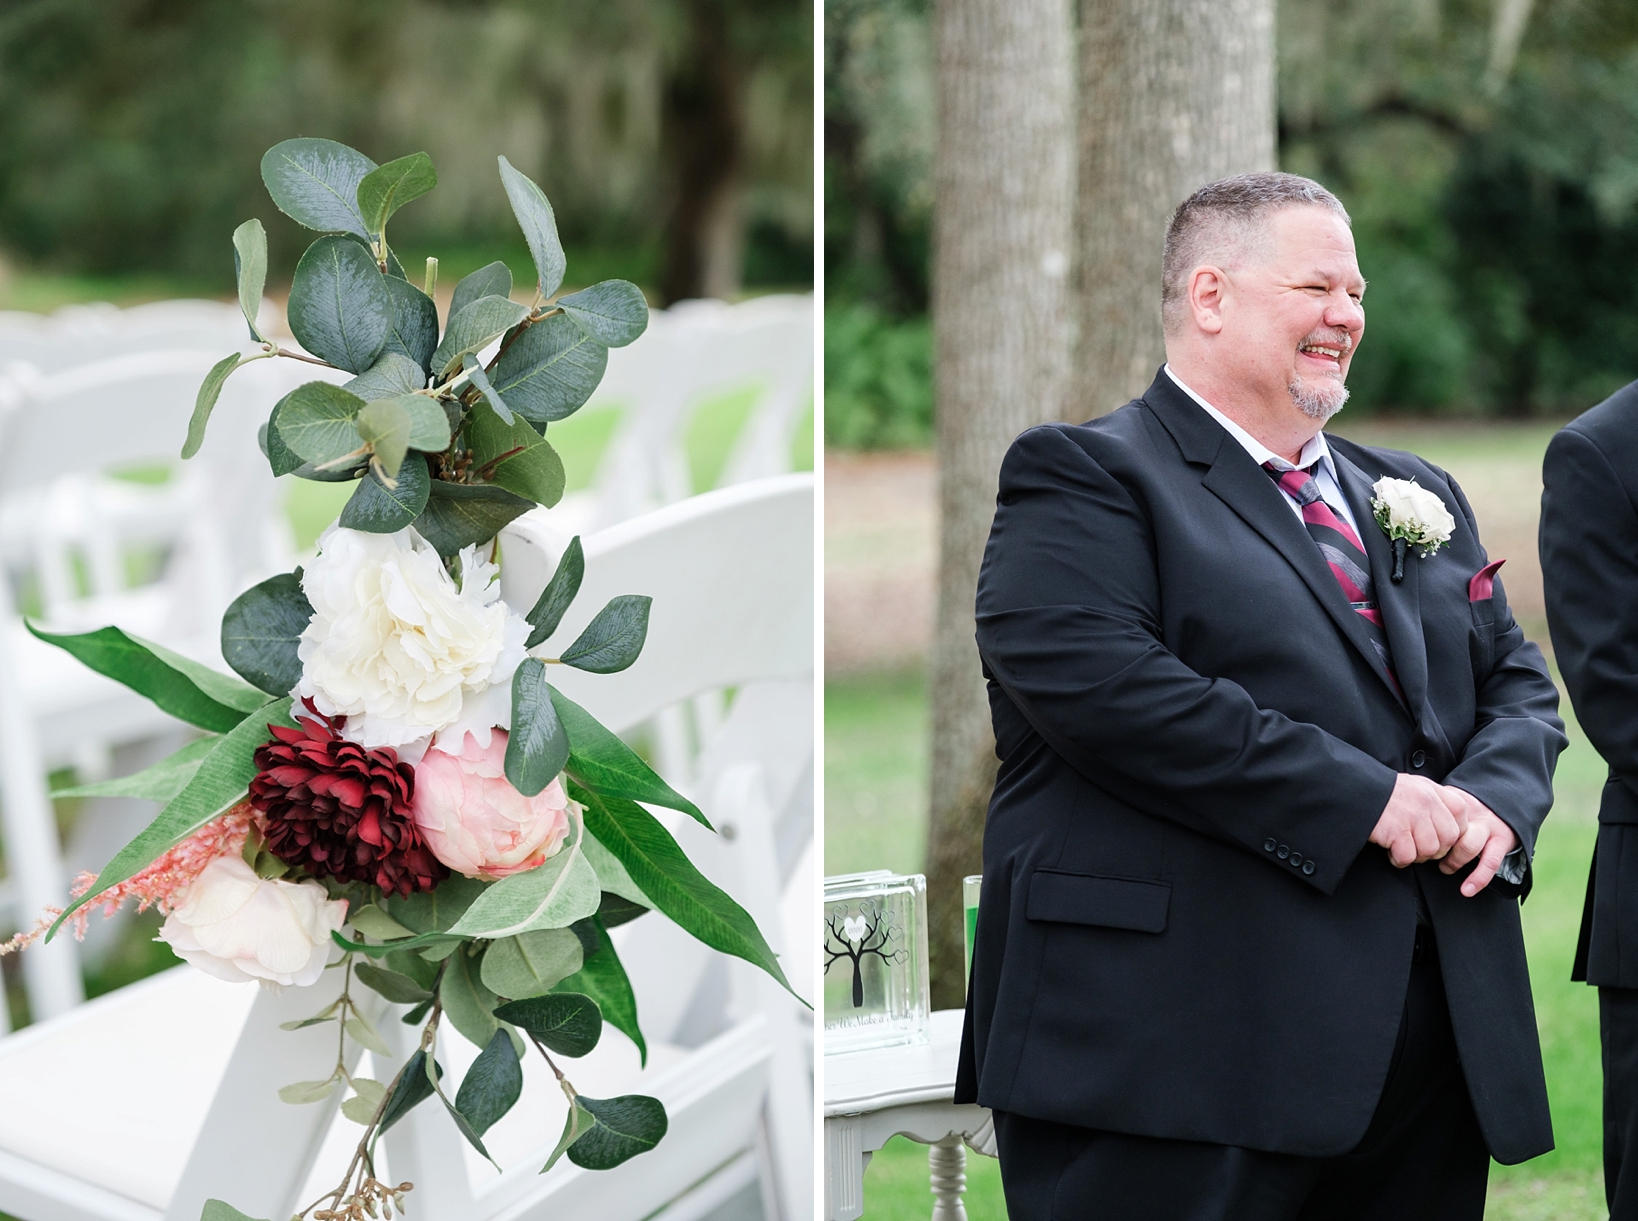 Floral detail during the ceremony and the Groom smiling as he sees his Bride for the first time